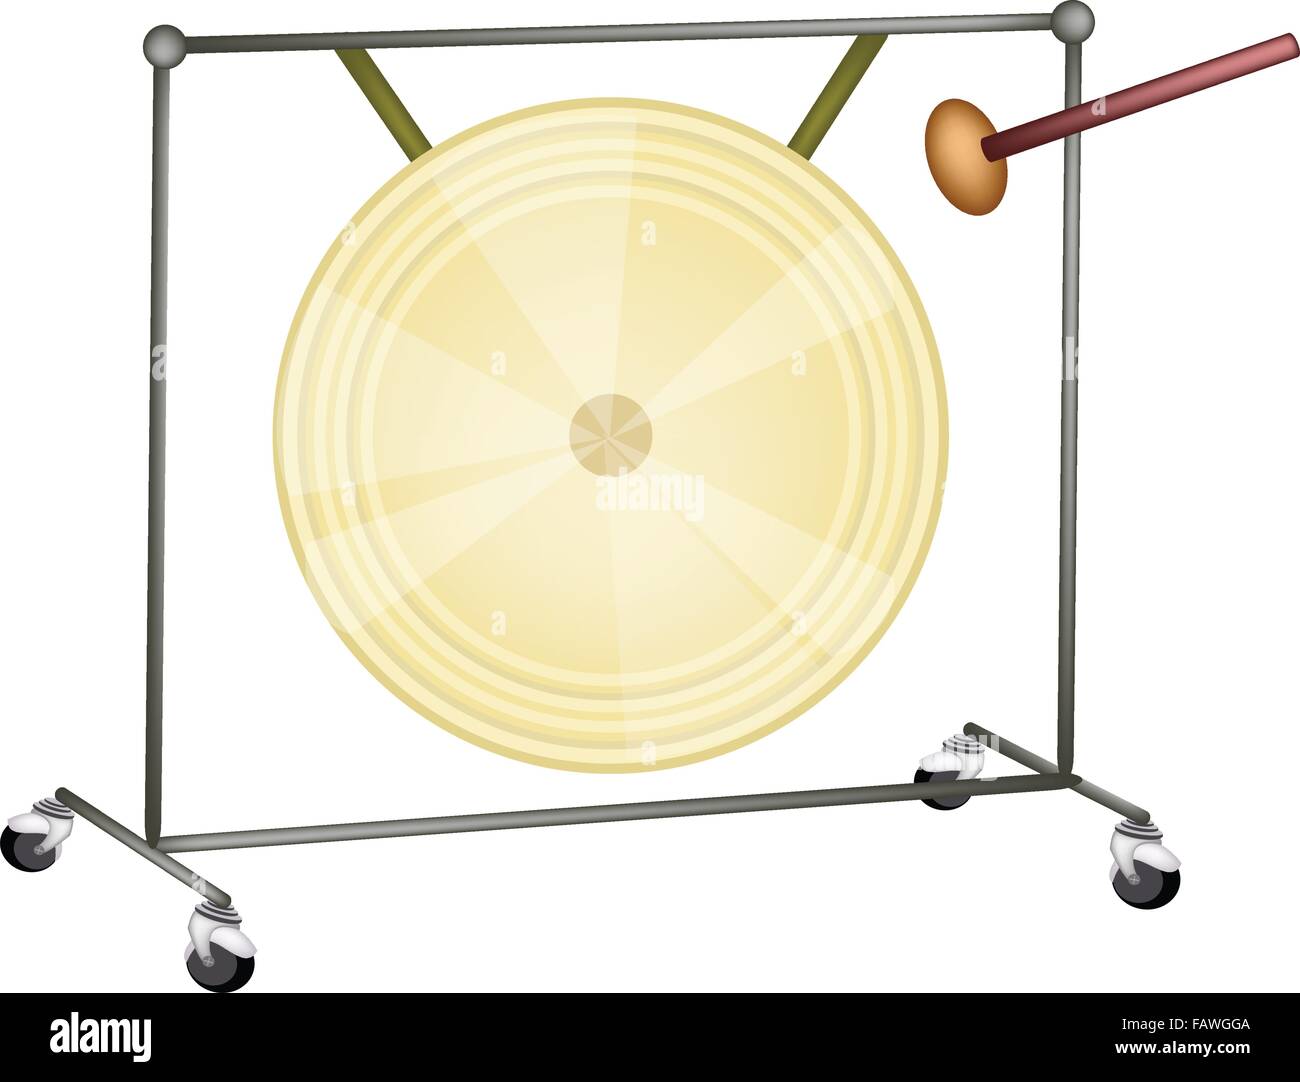 Music Instrument, An Illustration of Musical Metal Gong and Beater Isolated on White Background Stock Vector